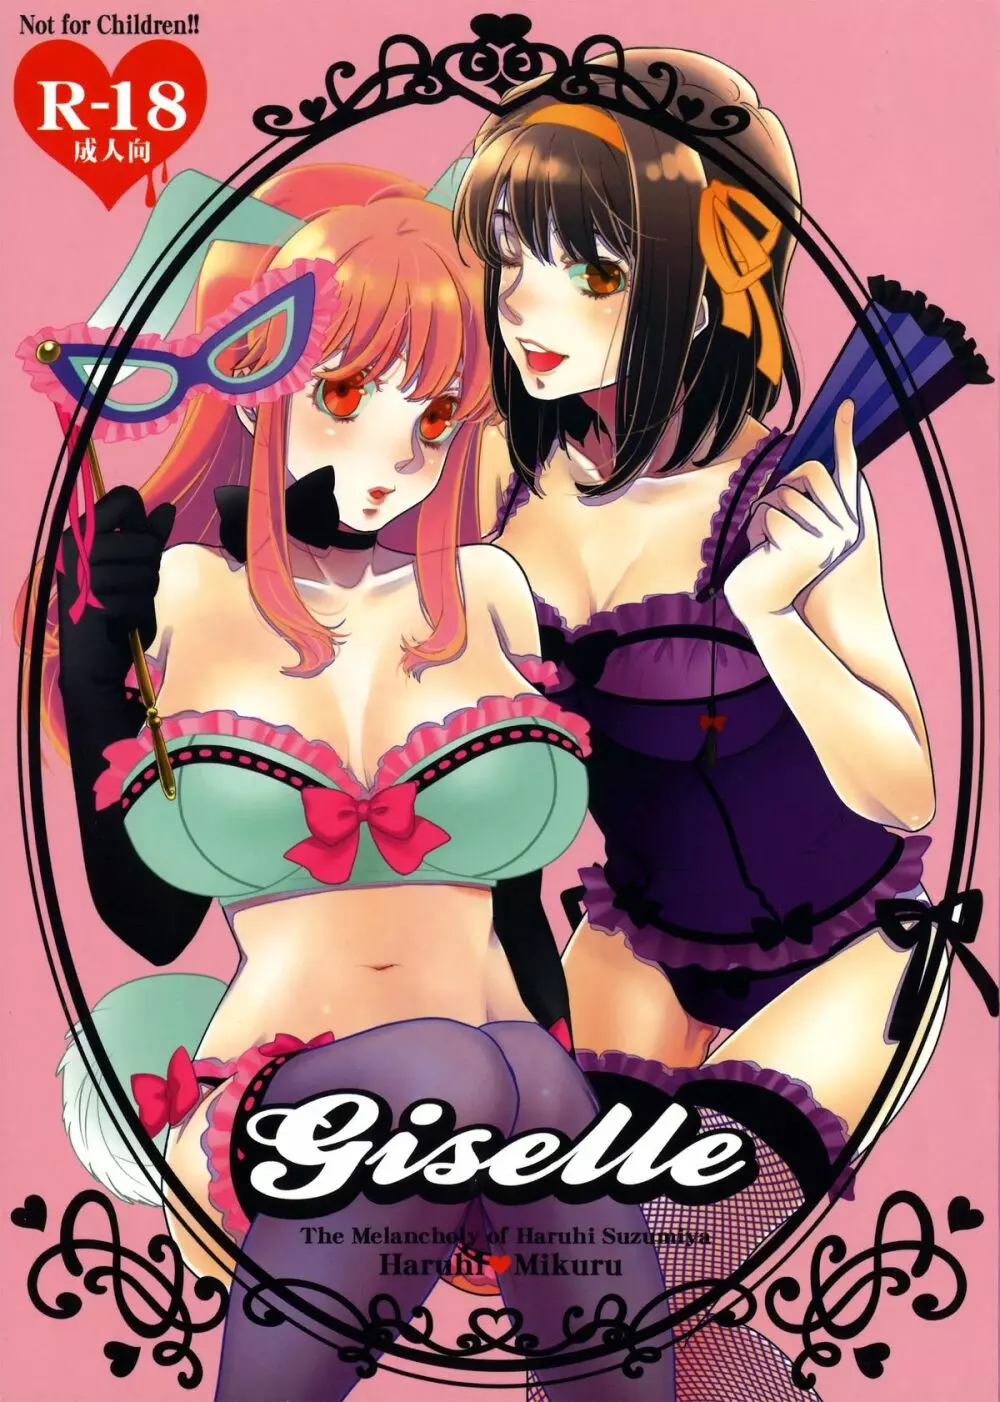 giselle - page1